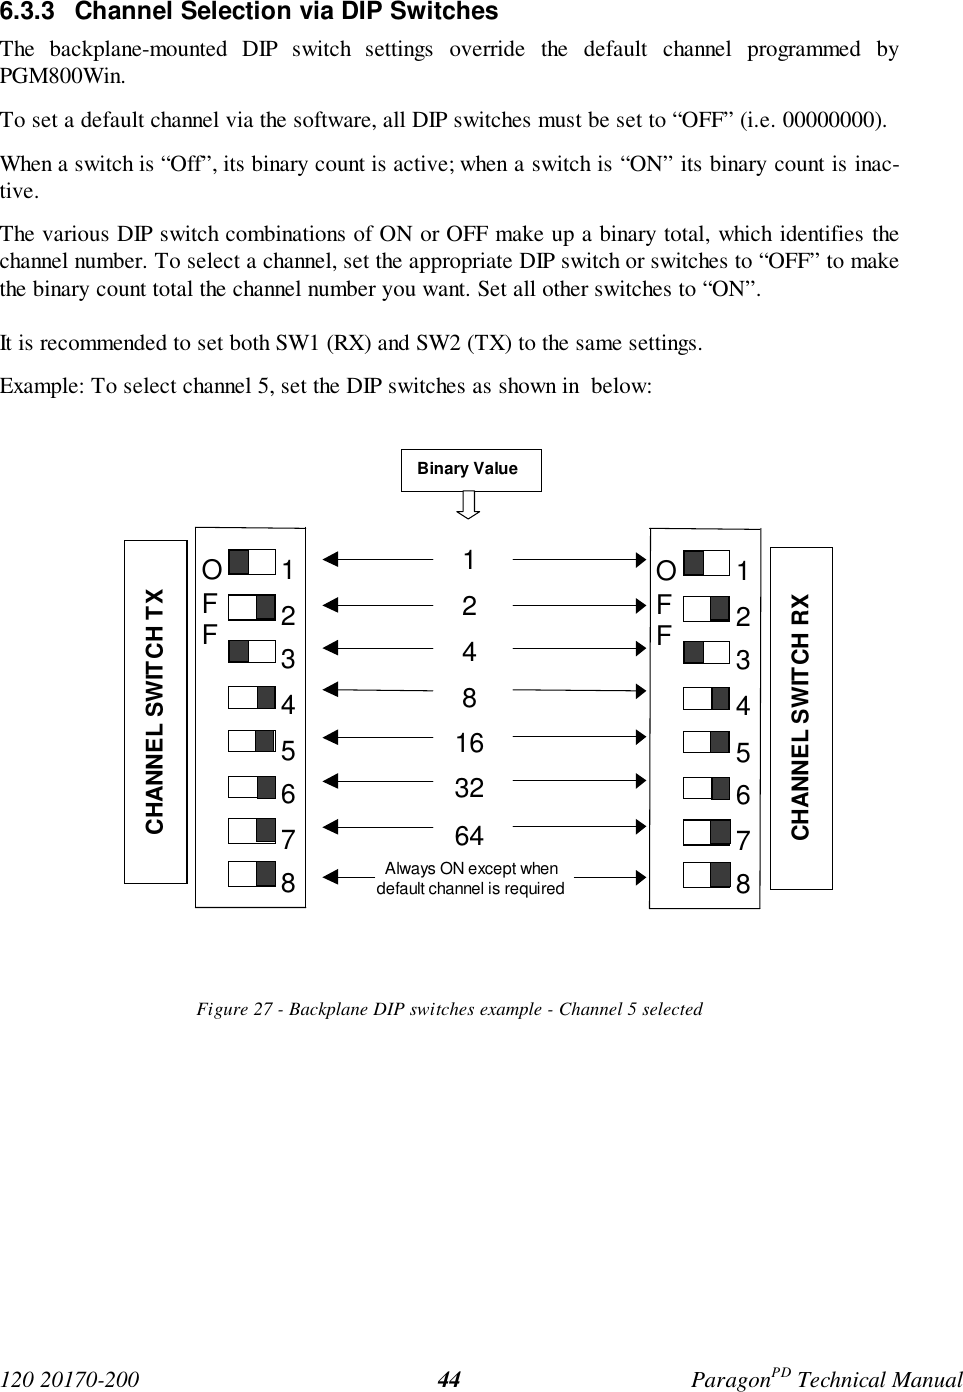 120 20170-200 ParagonPD Technical Manual446.3.3  Channel Selection via DIP SwitchesThe backplane-mounted DIP switch settings override the default channel programmed byPGM800Win.To set a default channel via the software, all DIP switches must be set to “OFF” (i.e. 00000000).When a switch is “Off”, its binary count is active; when a switch is “ON” its binary count is inac-tive.The various DIP switch combinations of ON or OFF make up a binary total, which identifies thechannel number. To select a channel, set the appropriate DIP switch or switches to “OFF” to makethe binary count total the channel number you want. Set all other switches to “ON”.It is recommended to set both SW1 (RX) and SW2 (TX) to the same settings.Example: To select channel 5, set the DIP switches as shown in  below:Figure 27 - Backplane DIP switches example - Channel 5 selectedBinary Value1248163264Always ON except whendefault channel is requiredCHANNEL SWITCH TXCHANNEL SWITCH RX12345678OFF12345678OFF